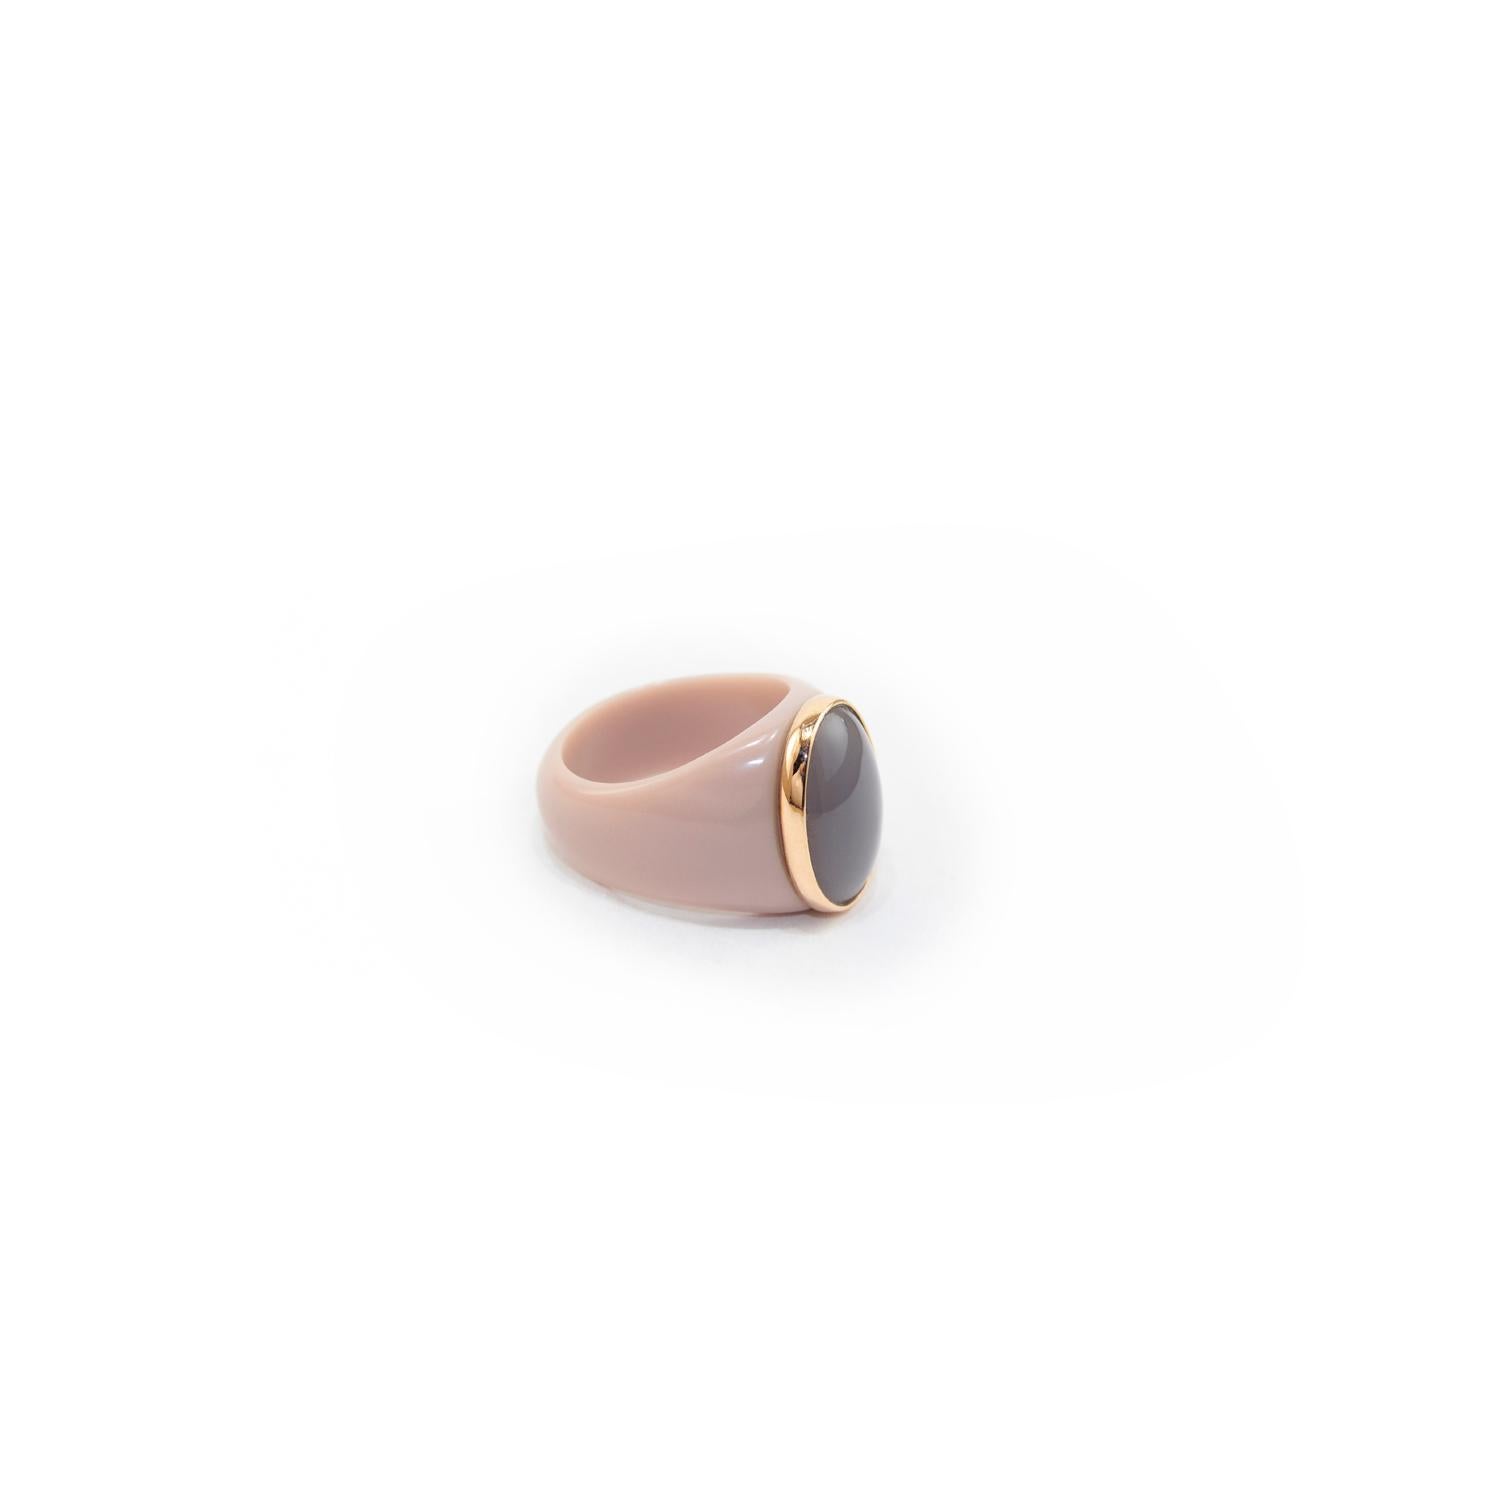 Elegant ring in powder bakelite, 18kt pink gold and grey agate cabochon. 
Pink Gold g. 1,8
Oval Grey agate cabochon size 19x14  mm
Size 19 (ita) 8.75 (usa)  59 (fra) 

